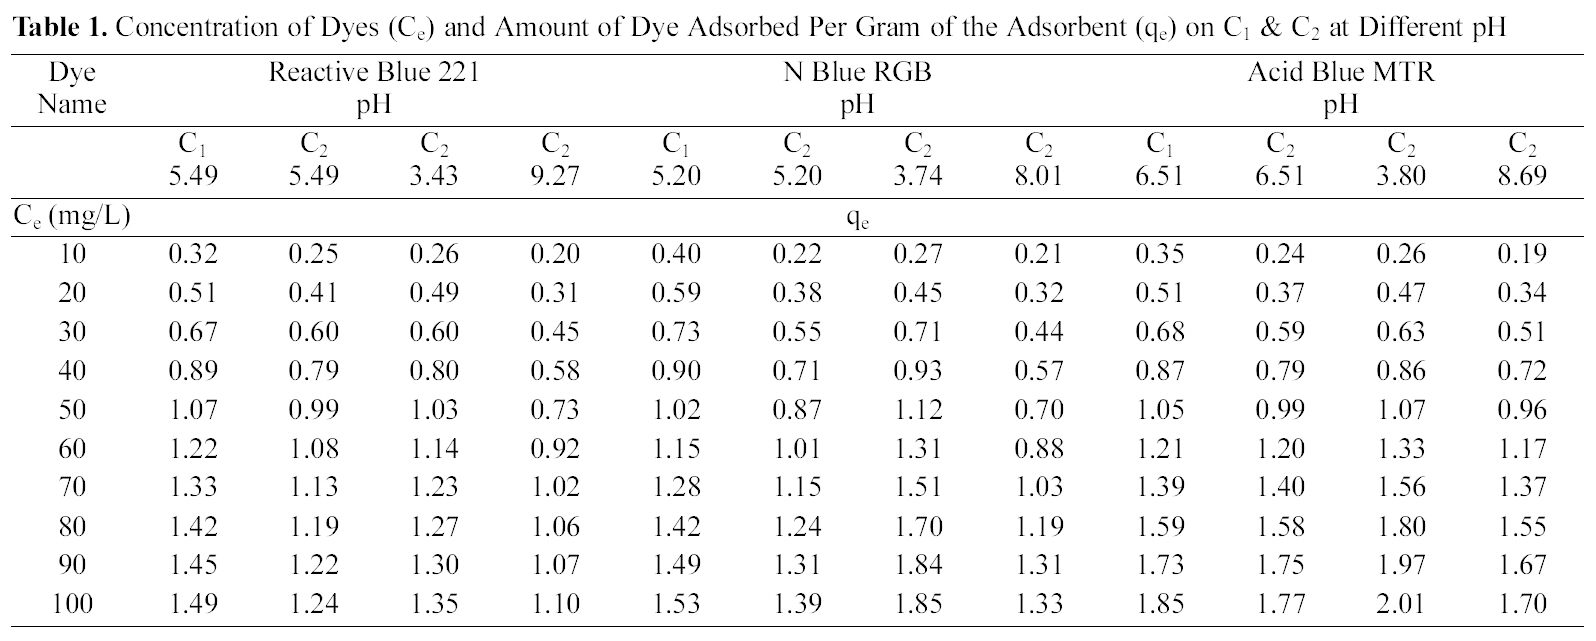 Concentration of Dyes (Ce) and Amount of Dye Adsorbed Per Gram of the Adsorbent (qe) on C1 & C2 at Different pH